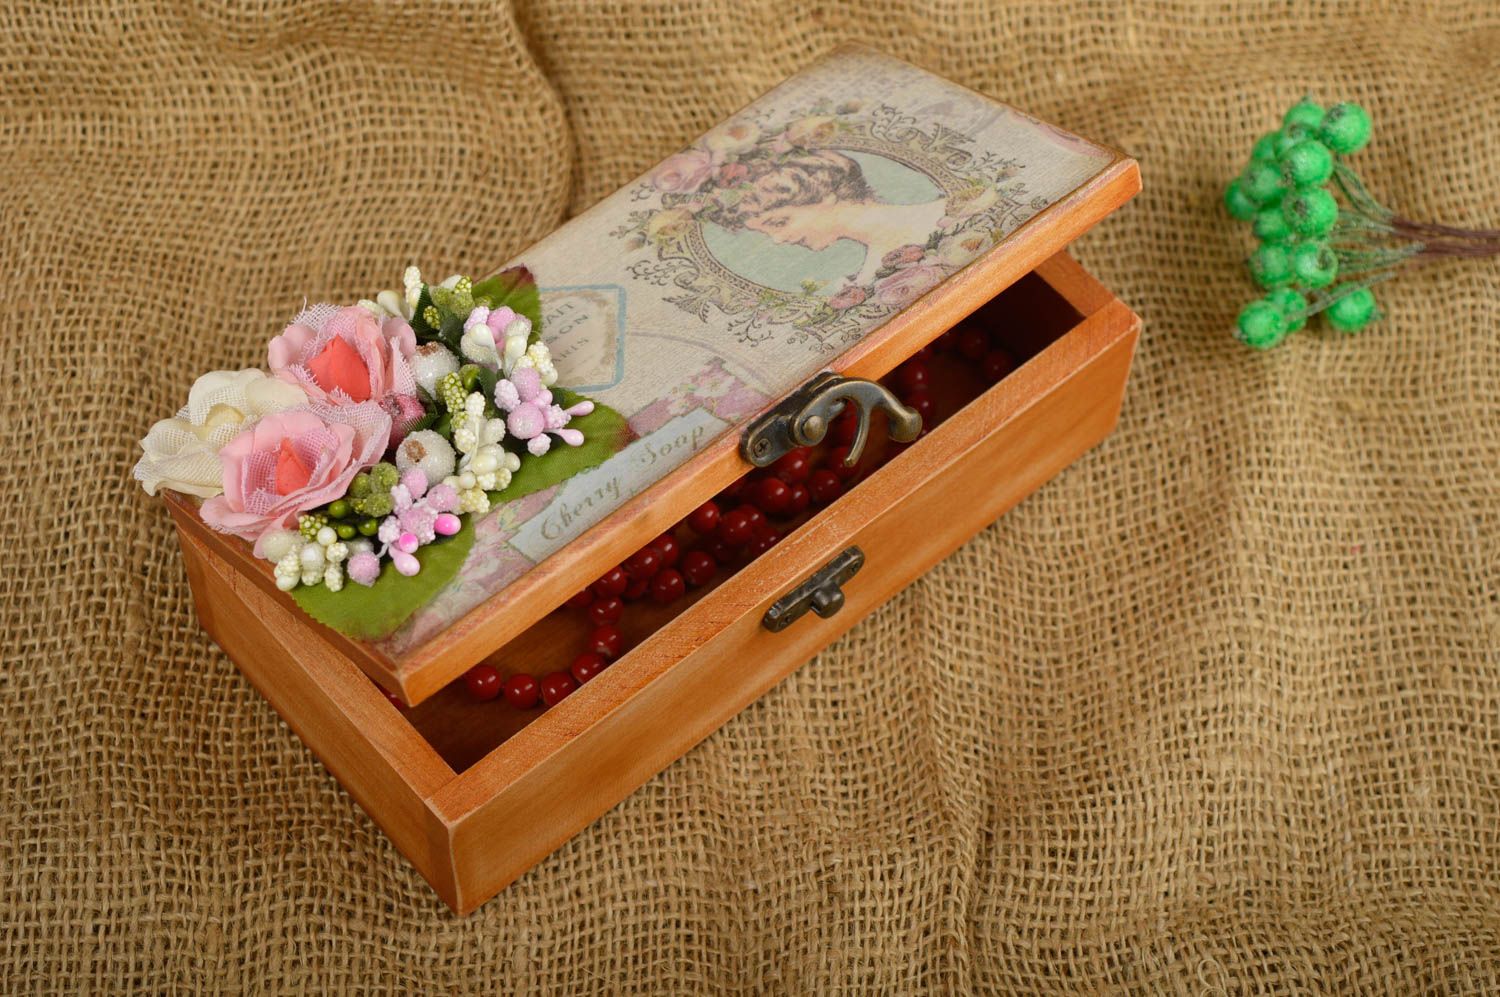 Handmade wooden jewelry box jewelry gift box vintage jewelry box gifts for her photo 1